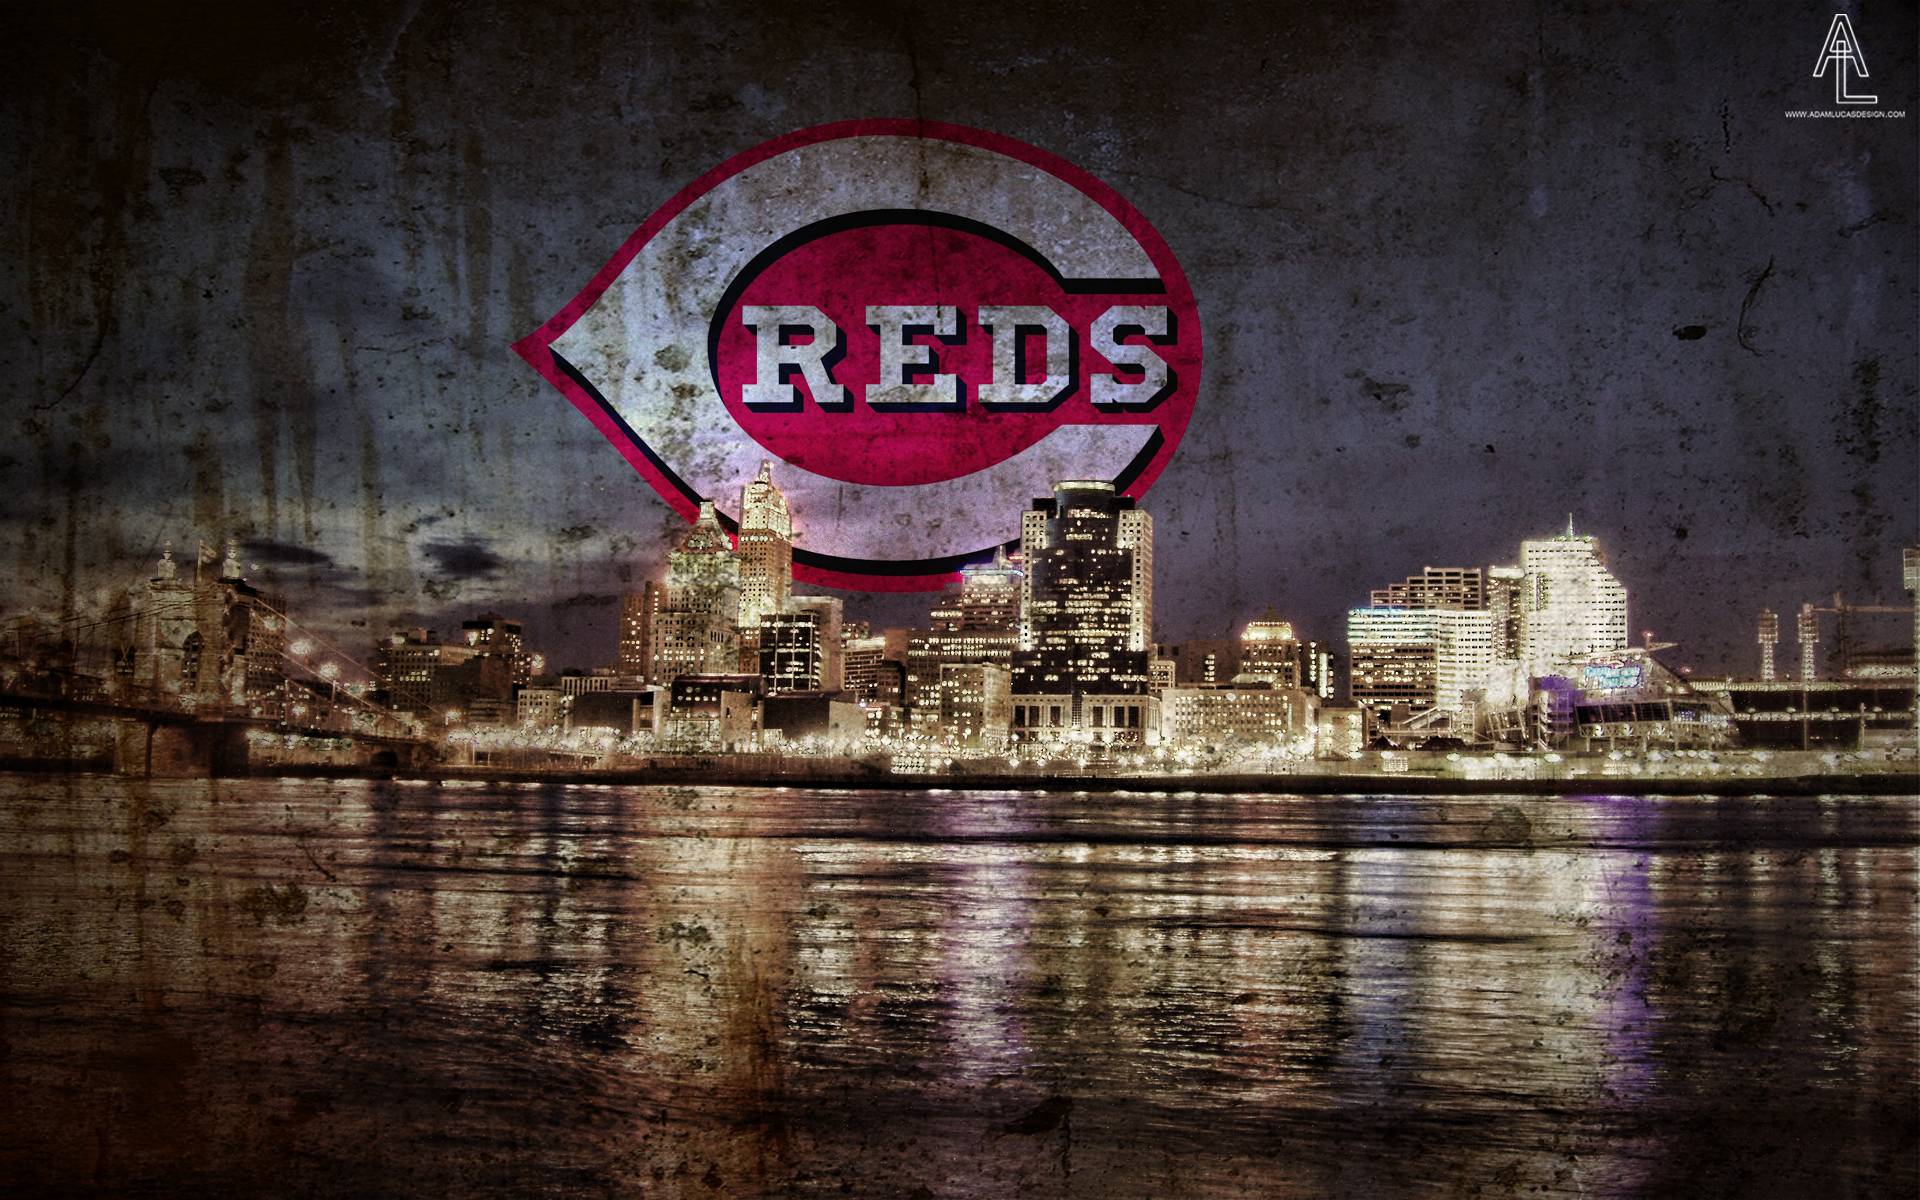 Cool Red S Logo - Cincinnati Reds Wallpapers and Background Images - stmed.net